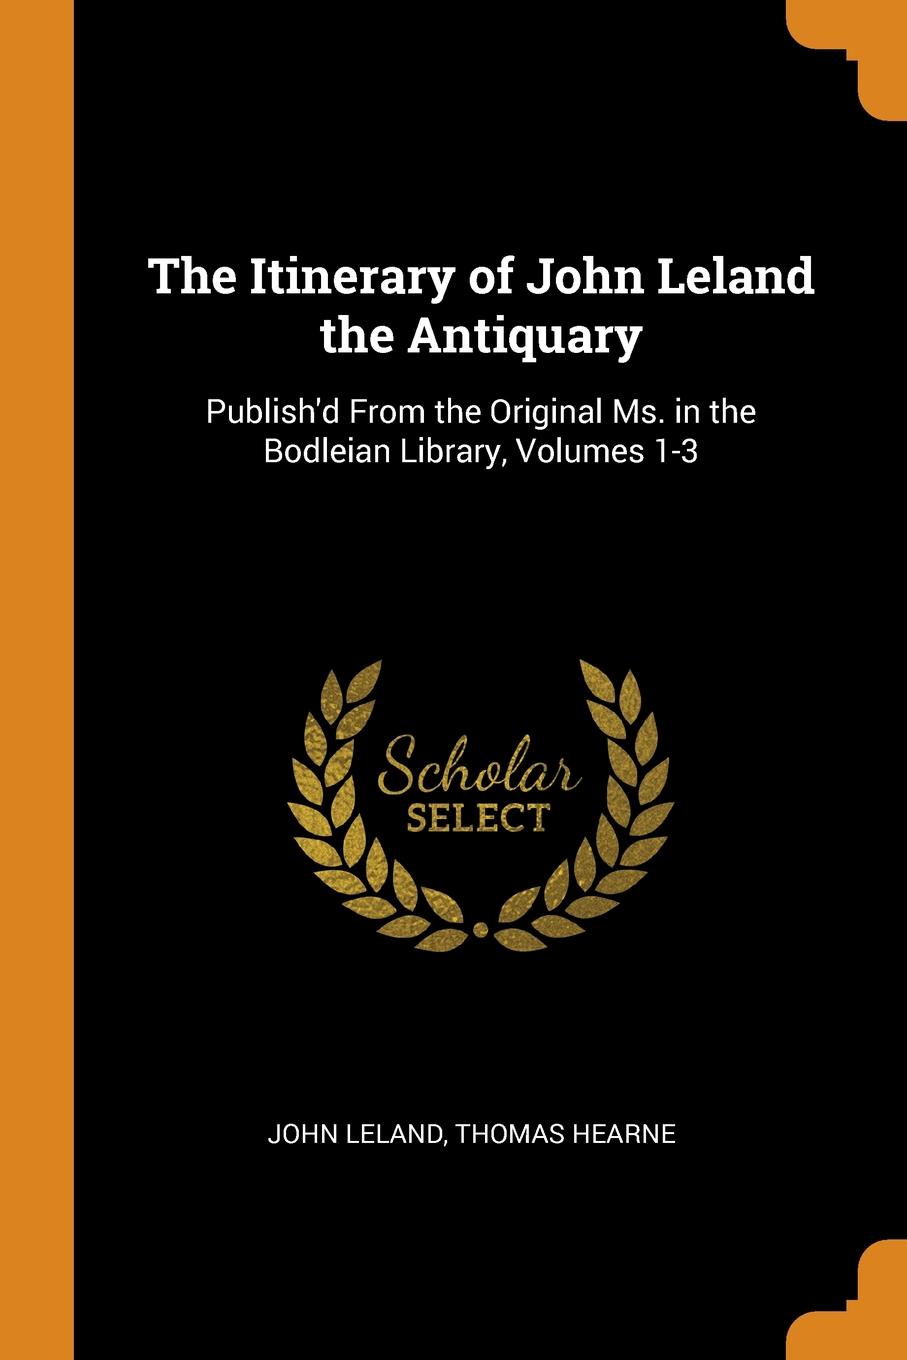 фото The Itinerary of John Leland the Antiquary. Publish.d From the Original Ms. in the Bodleian Library, Volumes 1-3